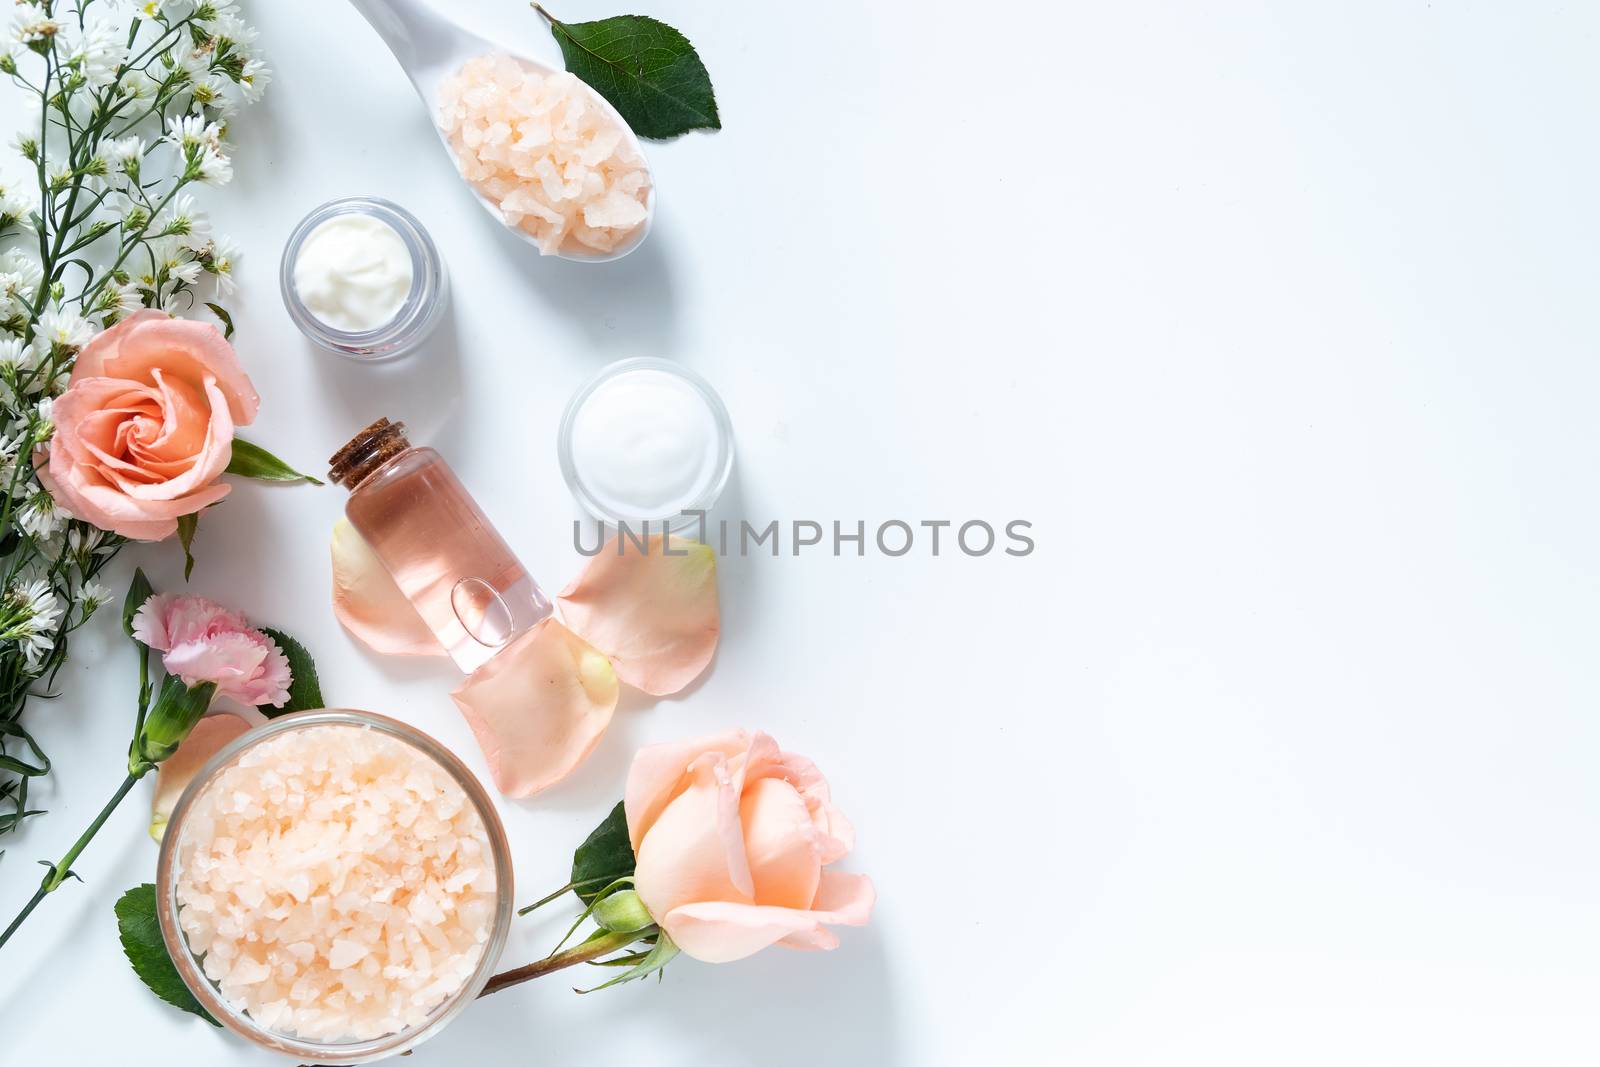 skin care concept. flat lays of skincare remedies style in package with blank label with natural materials isolated on white background with copy space